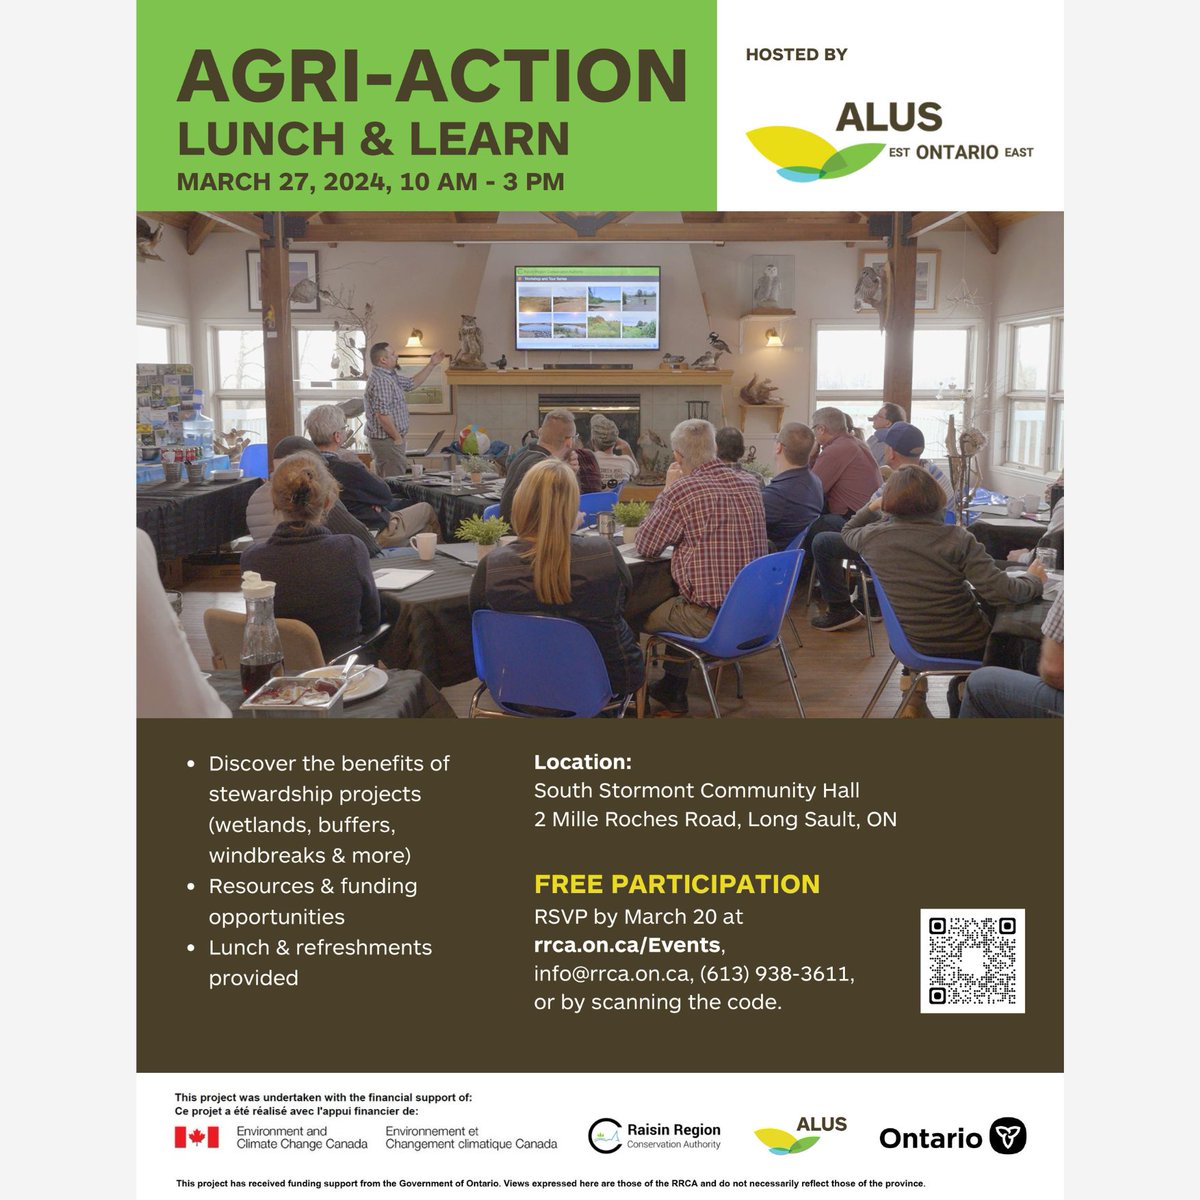 Don't miss out! Register ASAP to reserve your spot at ALUS Ontario East's free Lunch and Learn in South Stormont! Discover the benefits of stewardship on your farm and the generous grant opportunities available. #farming #bestpractices #stewardship